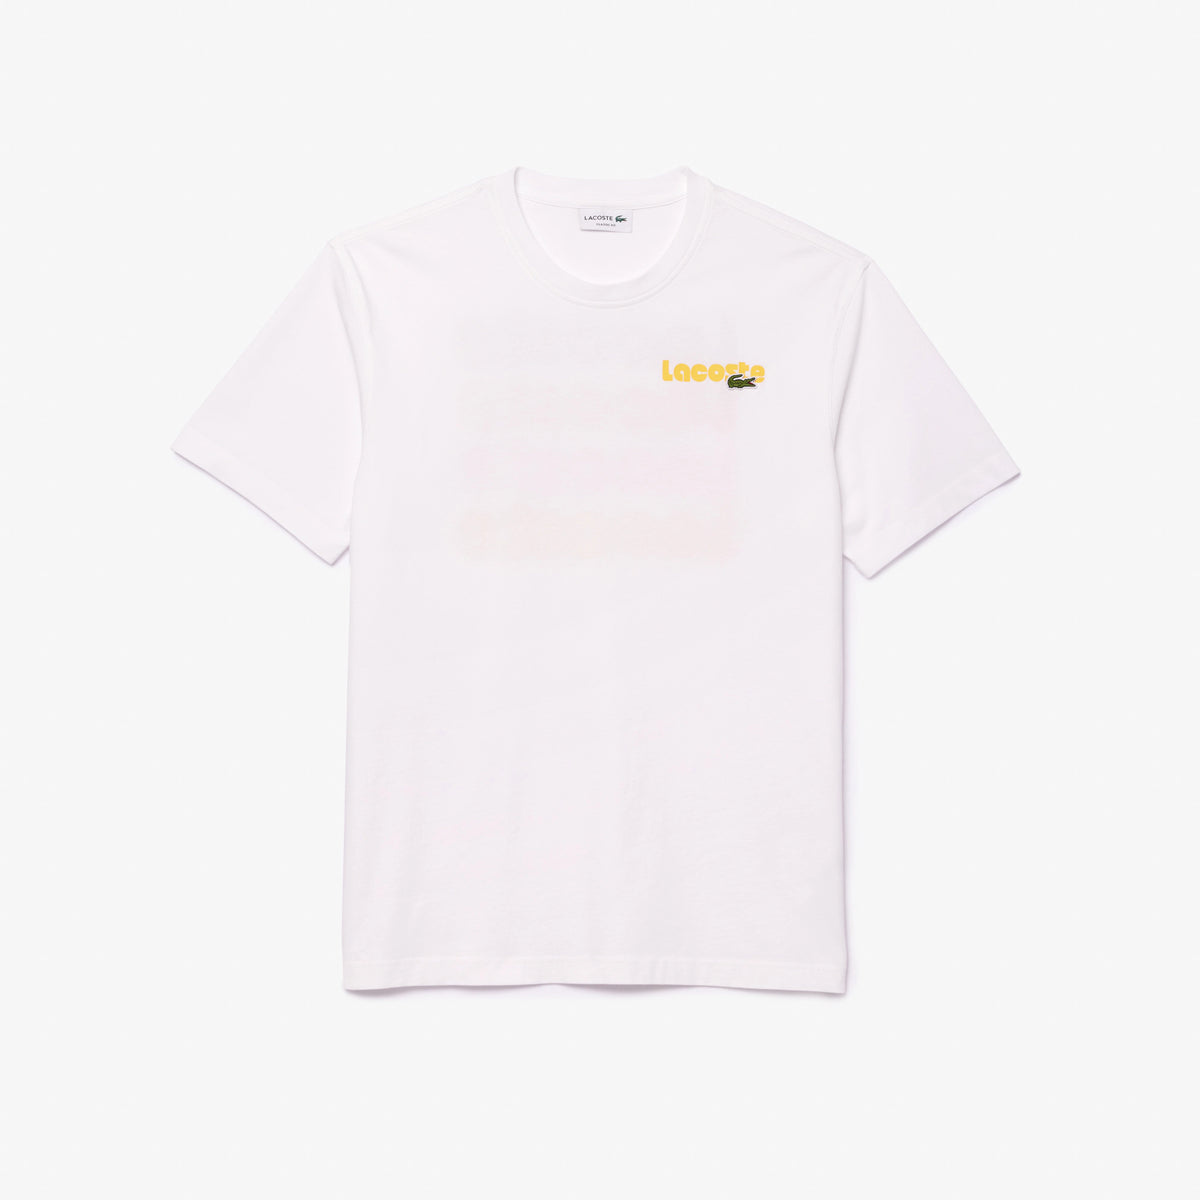 Washed Effect T-Shirt - White